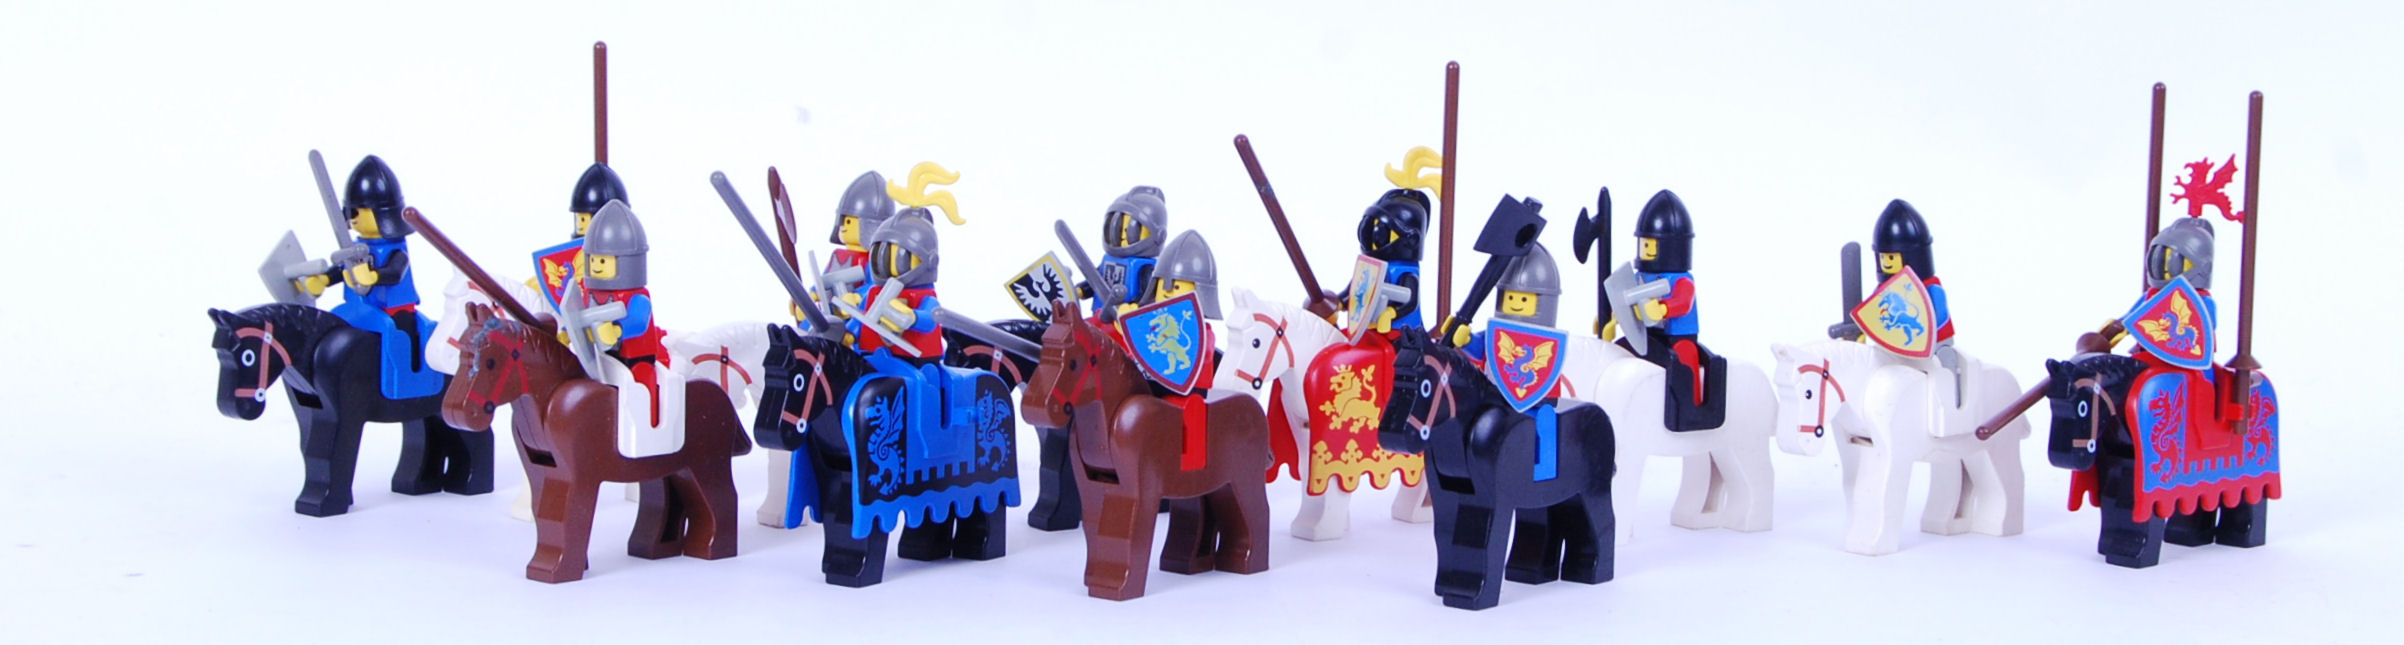 VINTAGE MINIFIGURES: A collection of 12x vintage 1980's Lego minifigures - all knights on horseback,